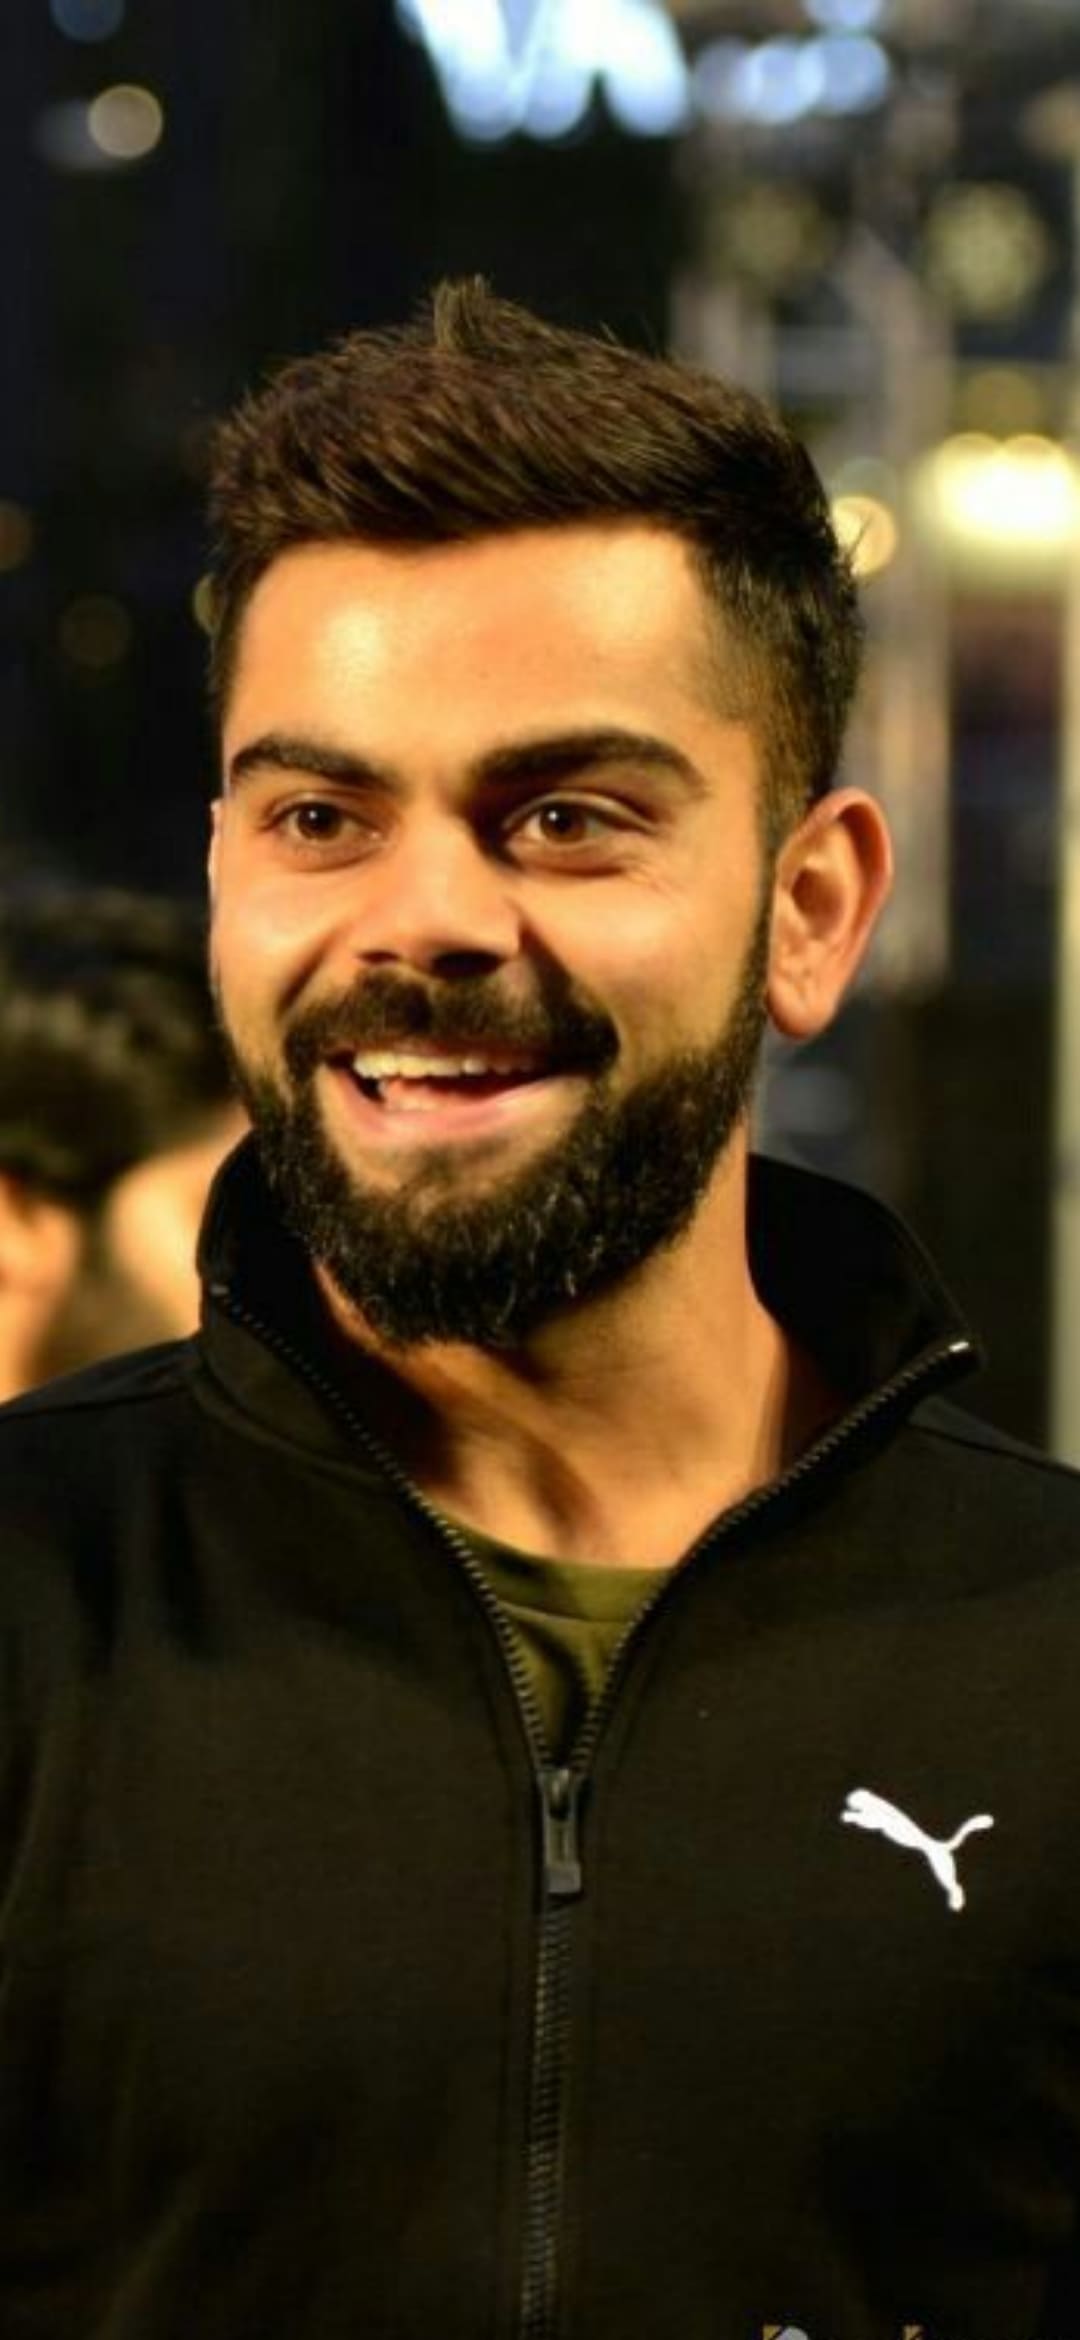 Virat Kohli Wallpapers Download New Wallpaper Virat Kohli 2930165 Hd Wallpaper Backgrounds Download So most of the people looking to download virat kohli latest hd images search from india. virat kohli wallpapers download new